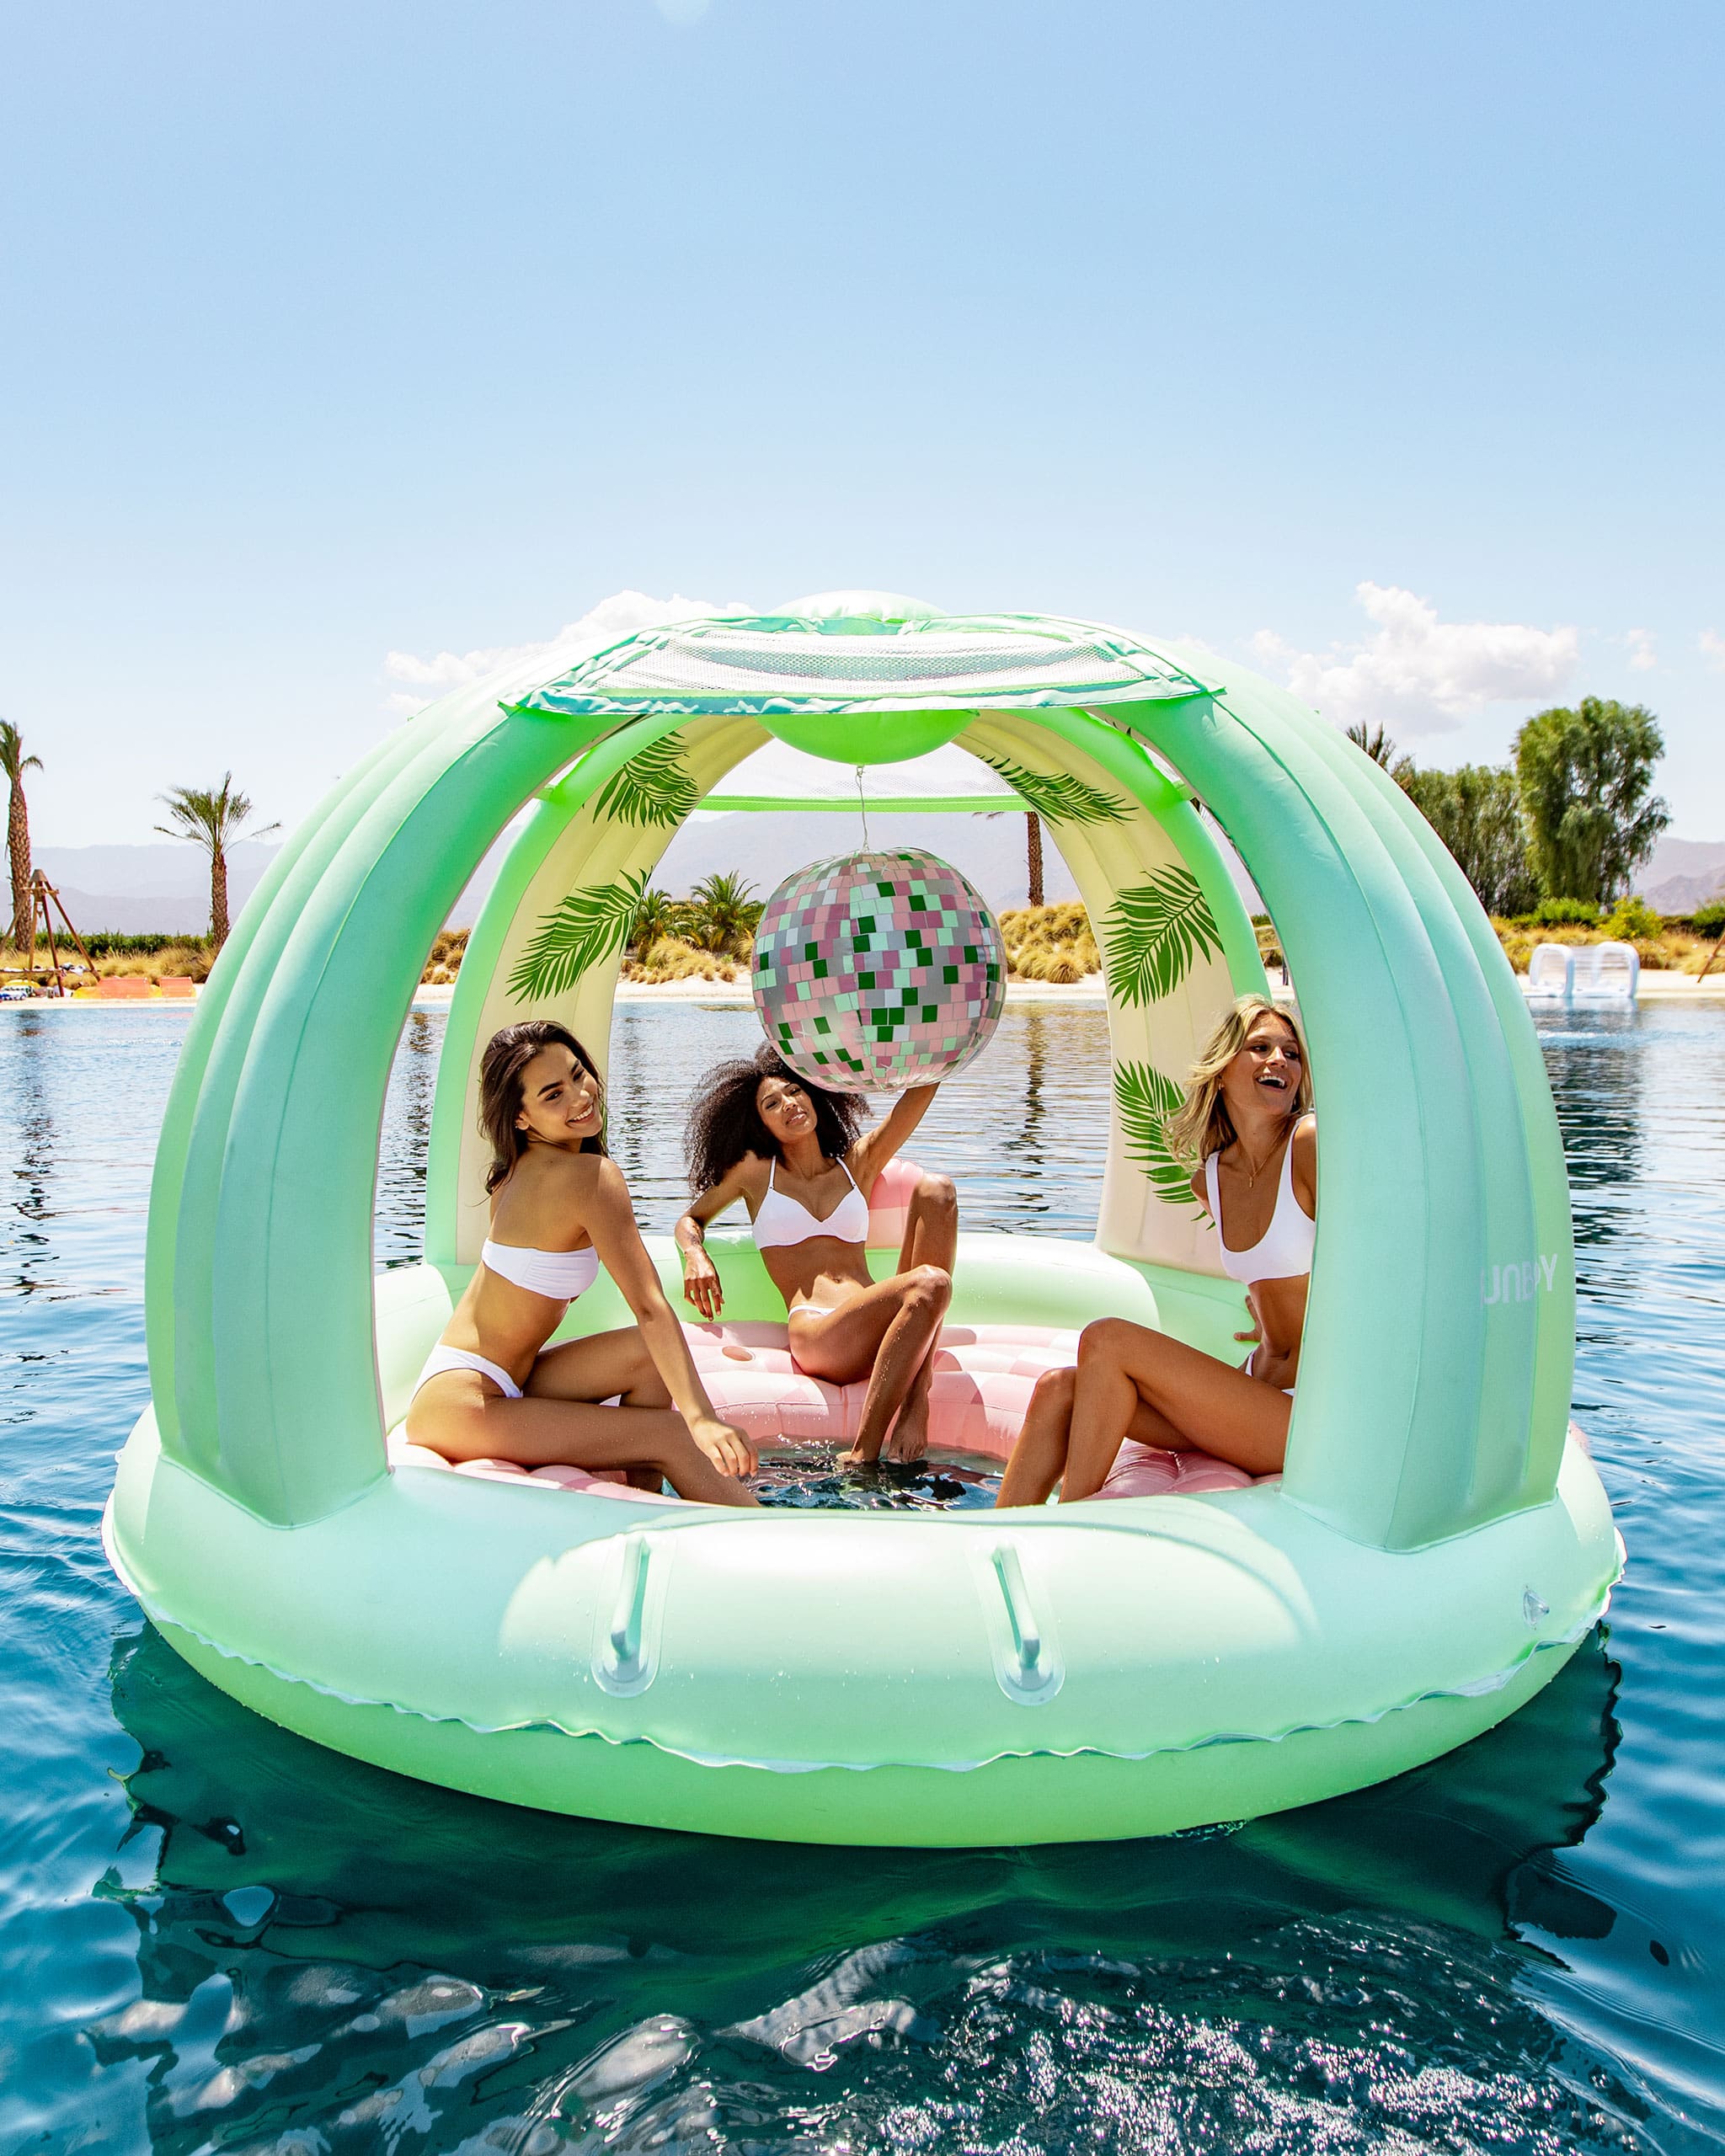 These Cool Pool Floats Are Equally Fun and Cheap